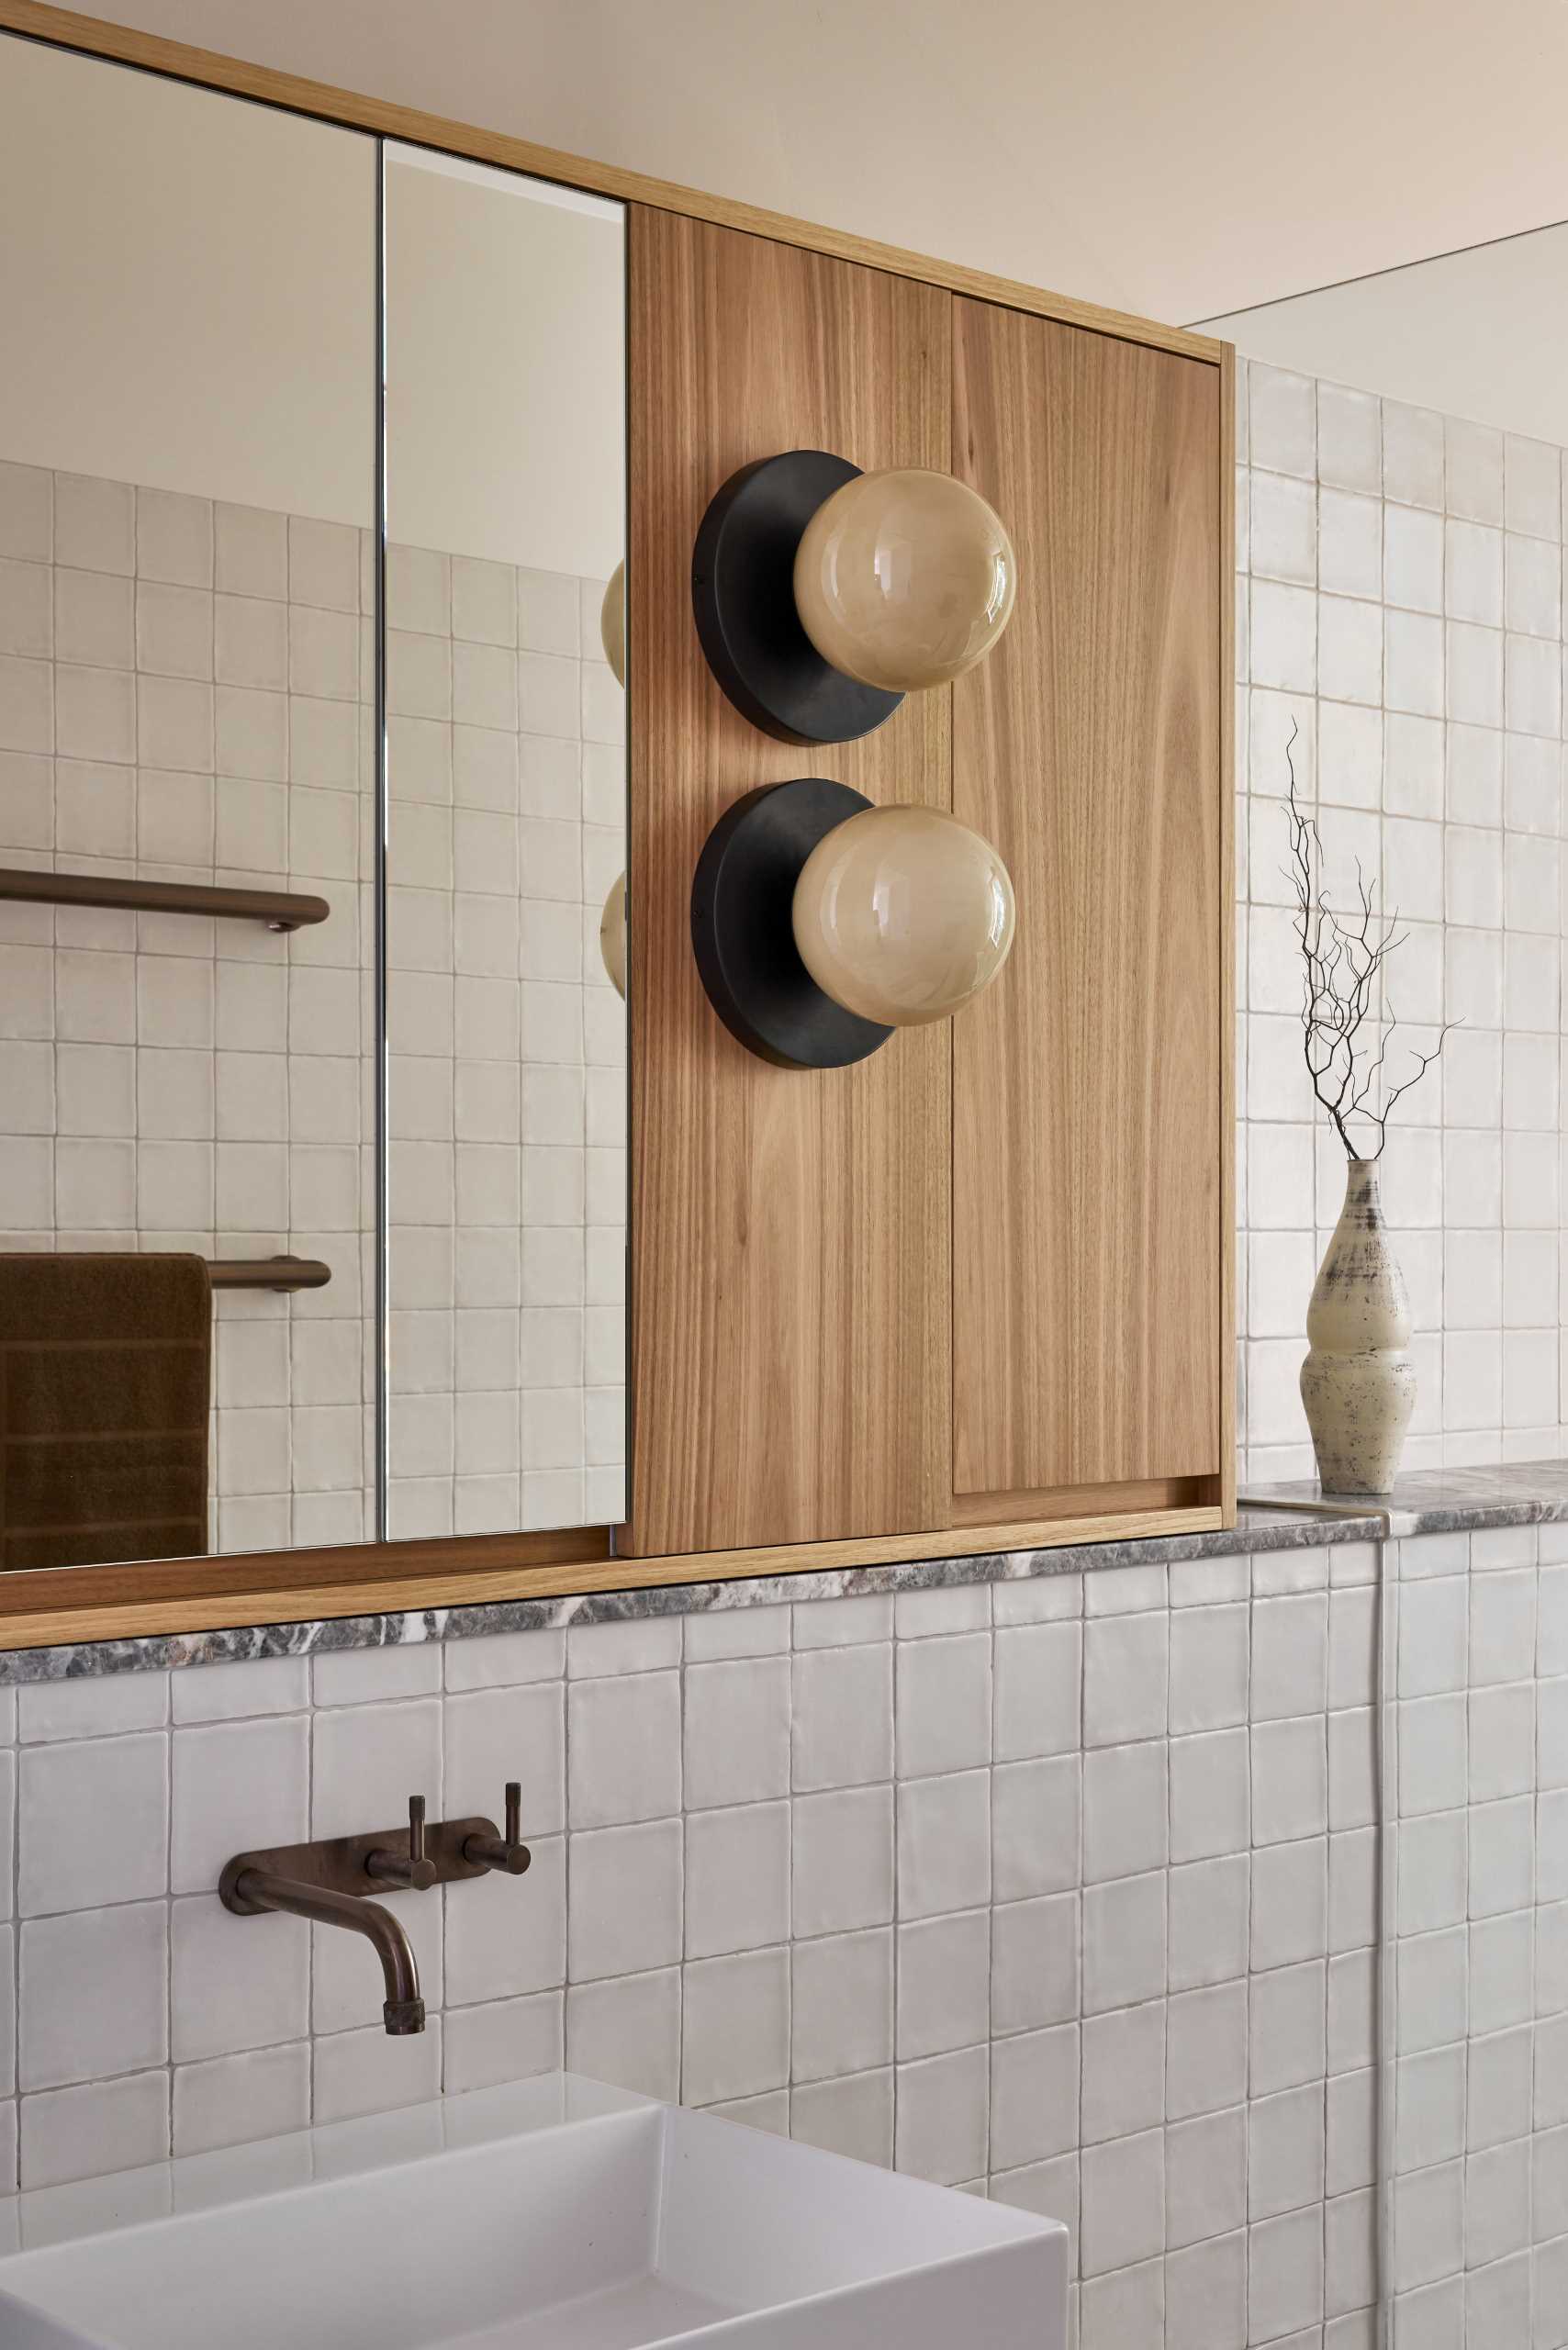 In this bathroom, there's a built-in bathtub next to the shower, while tiles partially cover the walls, and globe lights are positioned next to the mirror.